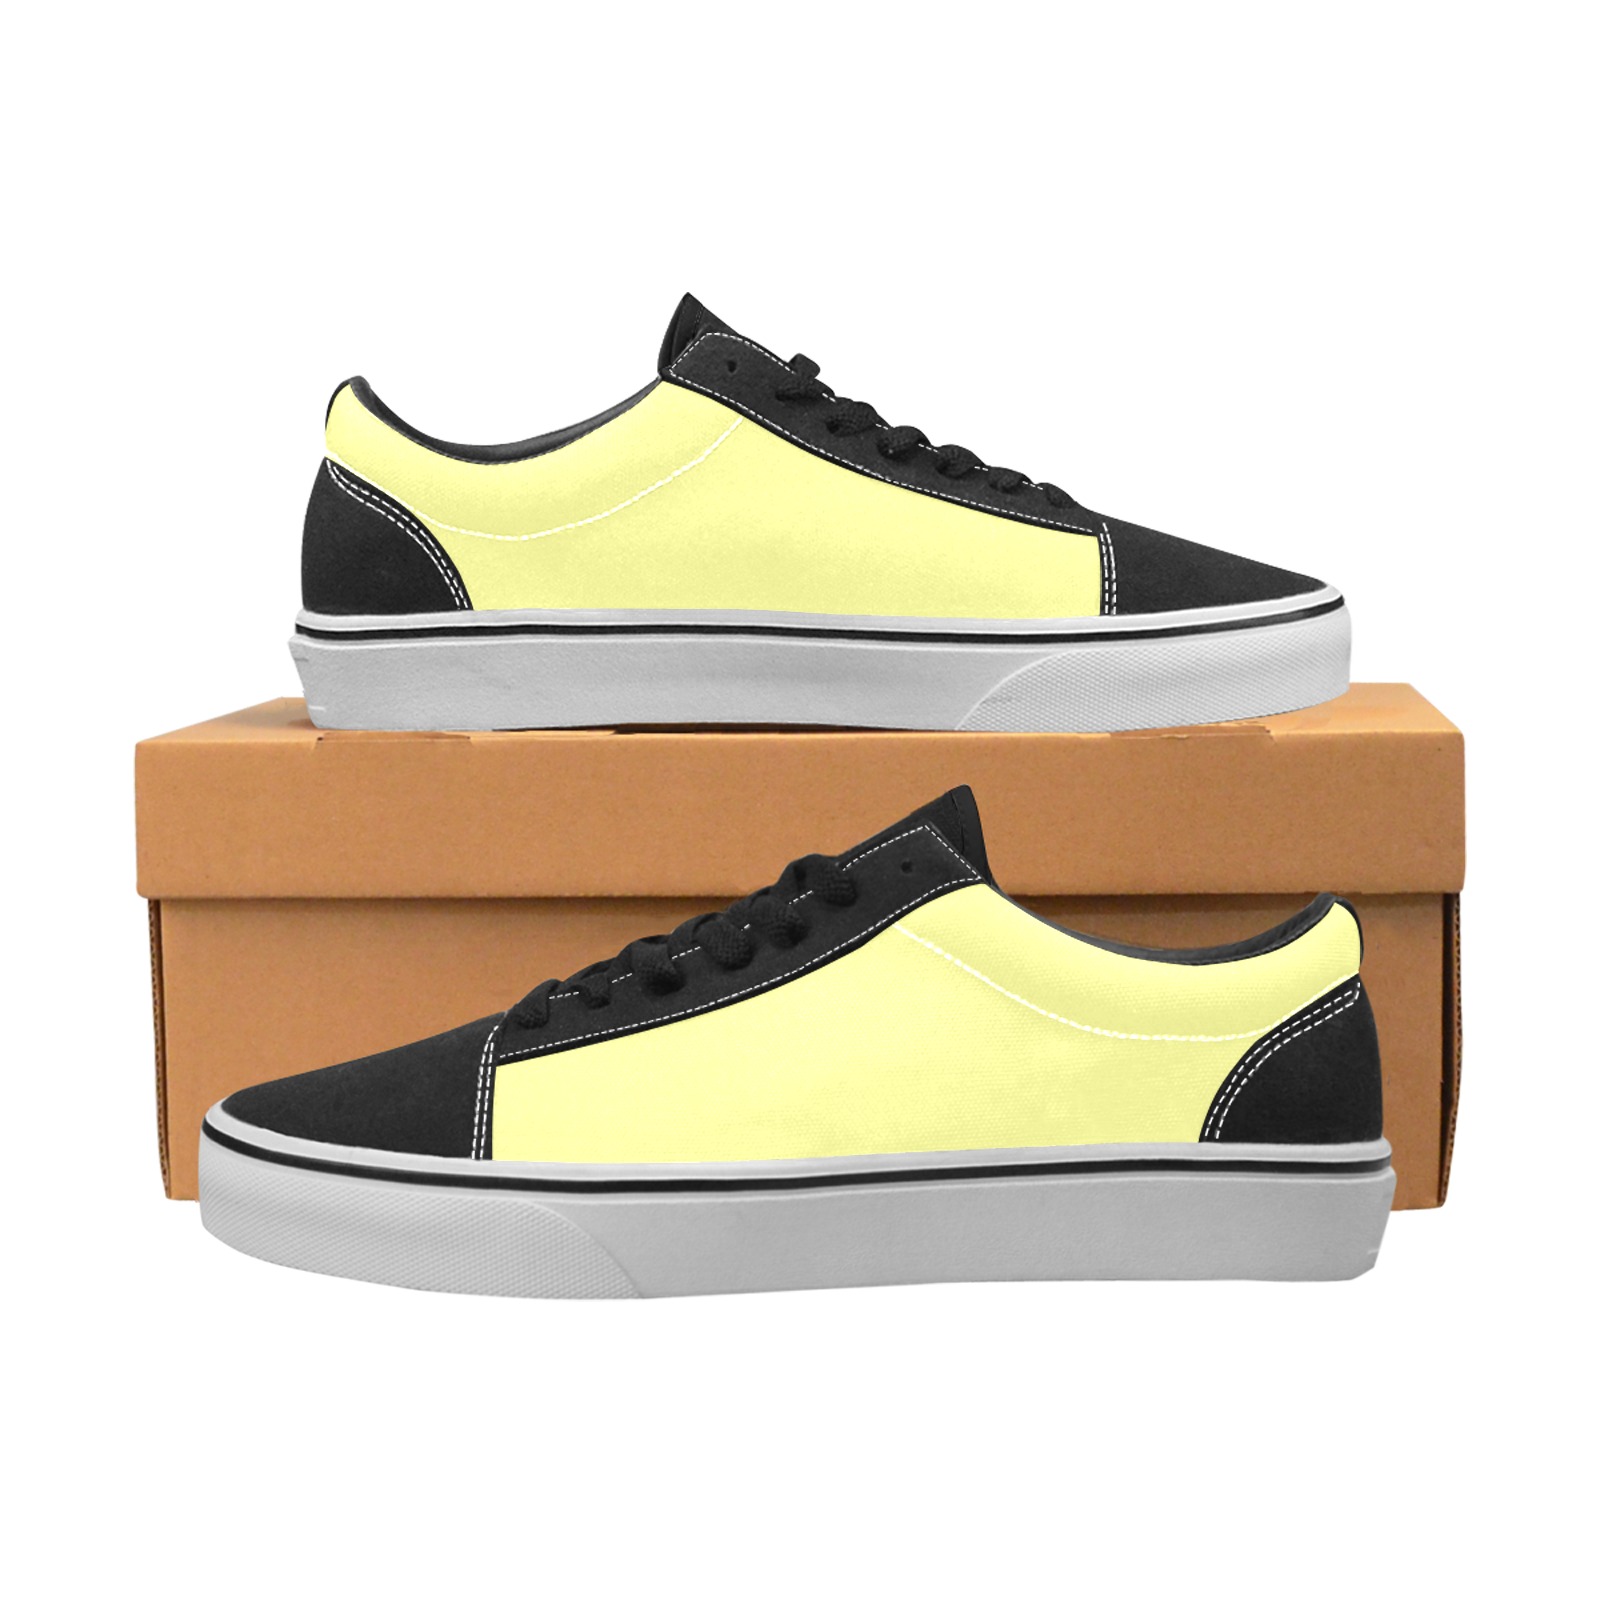 color canary yellow Women's Low Top Skateboarding Shoes (Model E001-2)